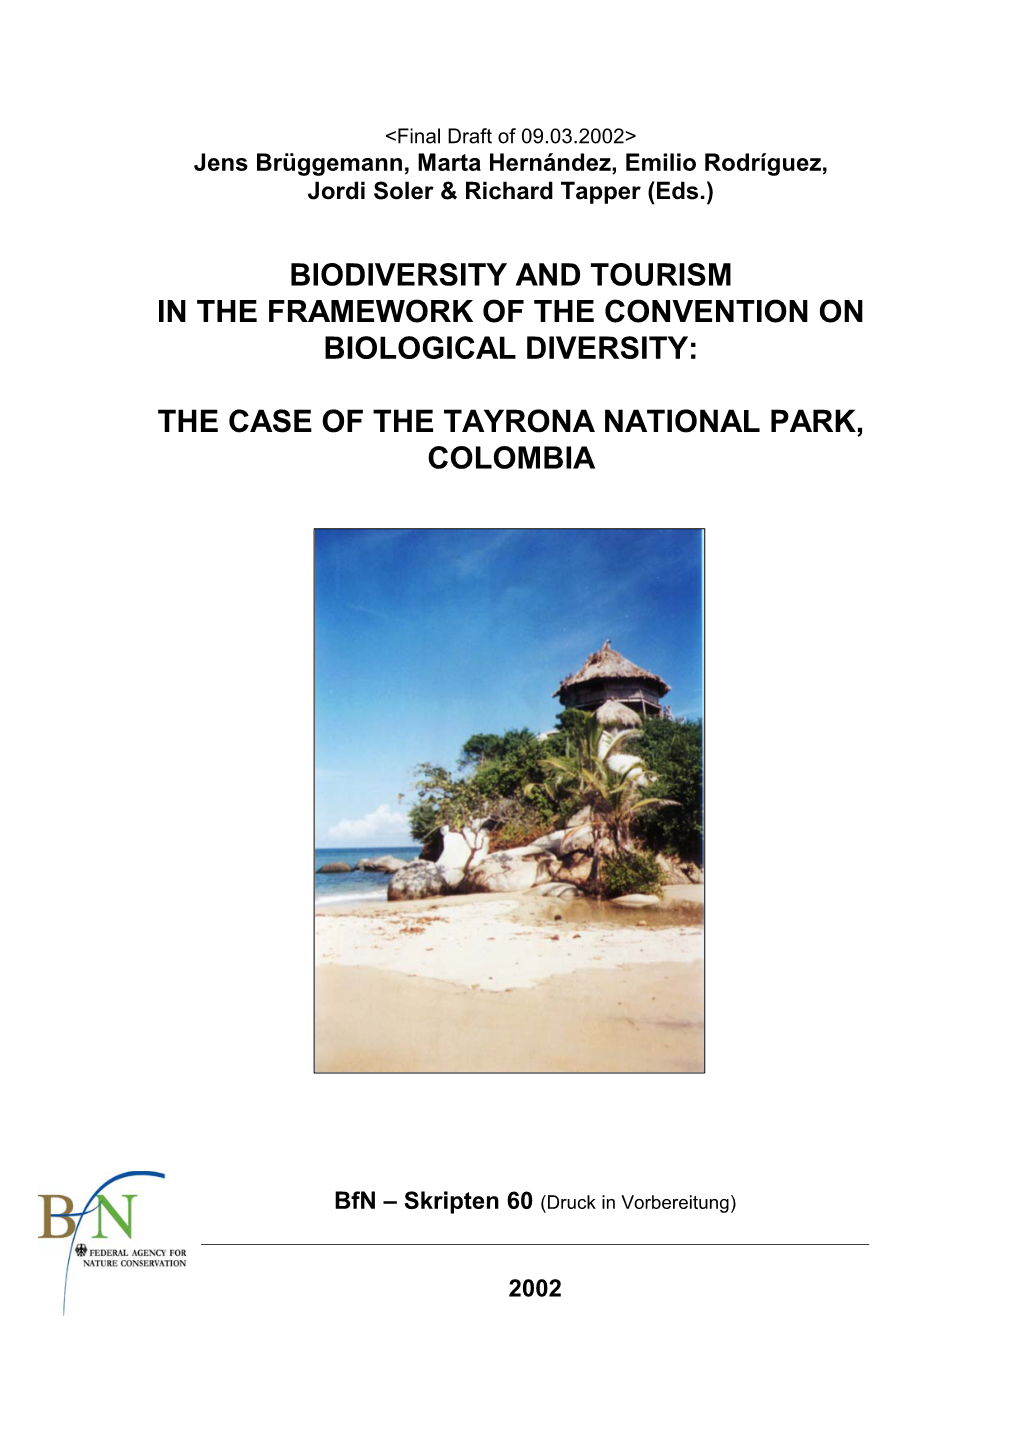 The Case of the Tayrona National Park, Colombia